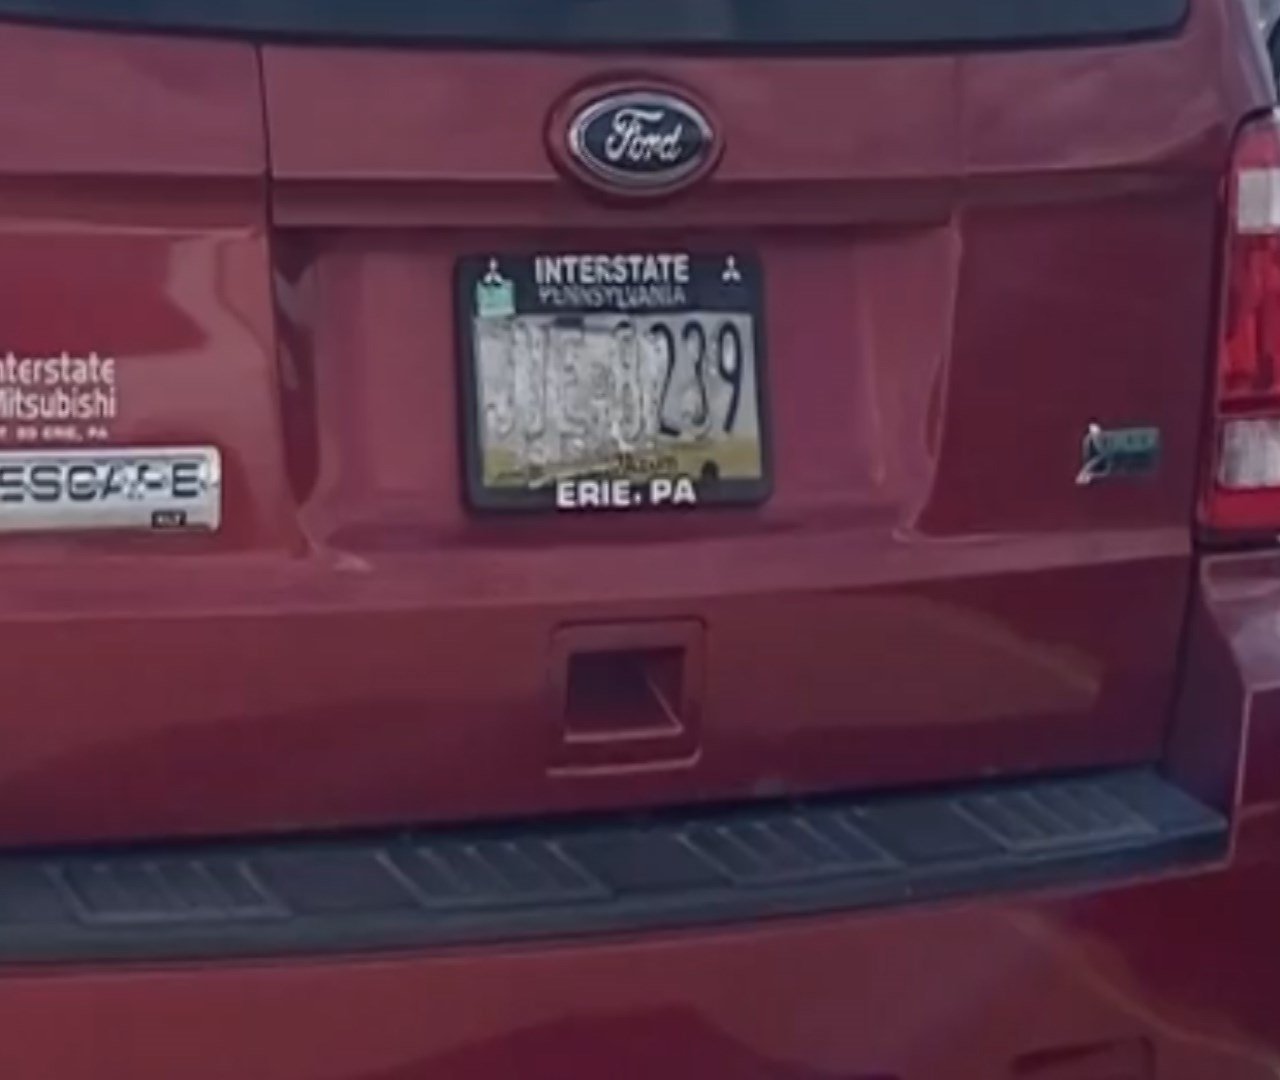 Pennsylvania Department of Transportation Rejects Racists, Juvenile Personalized License Plates